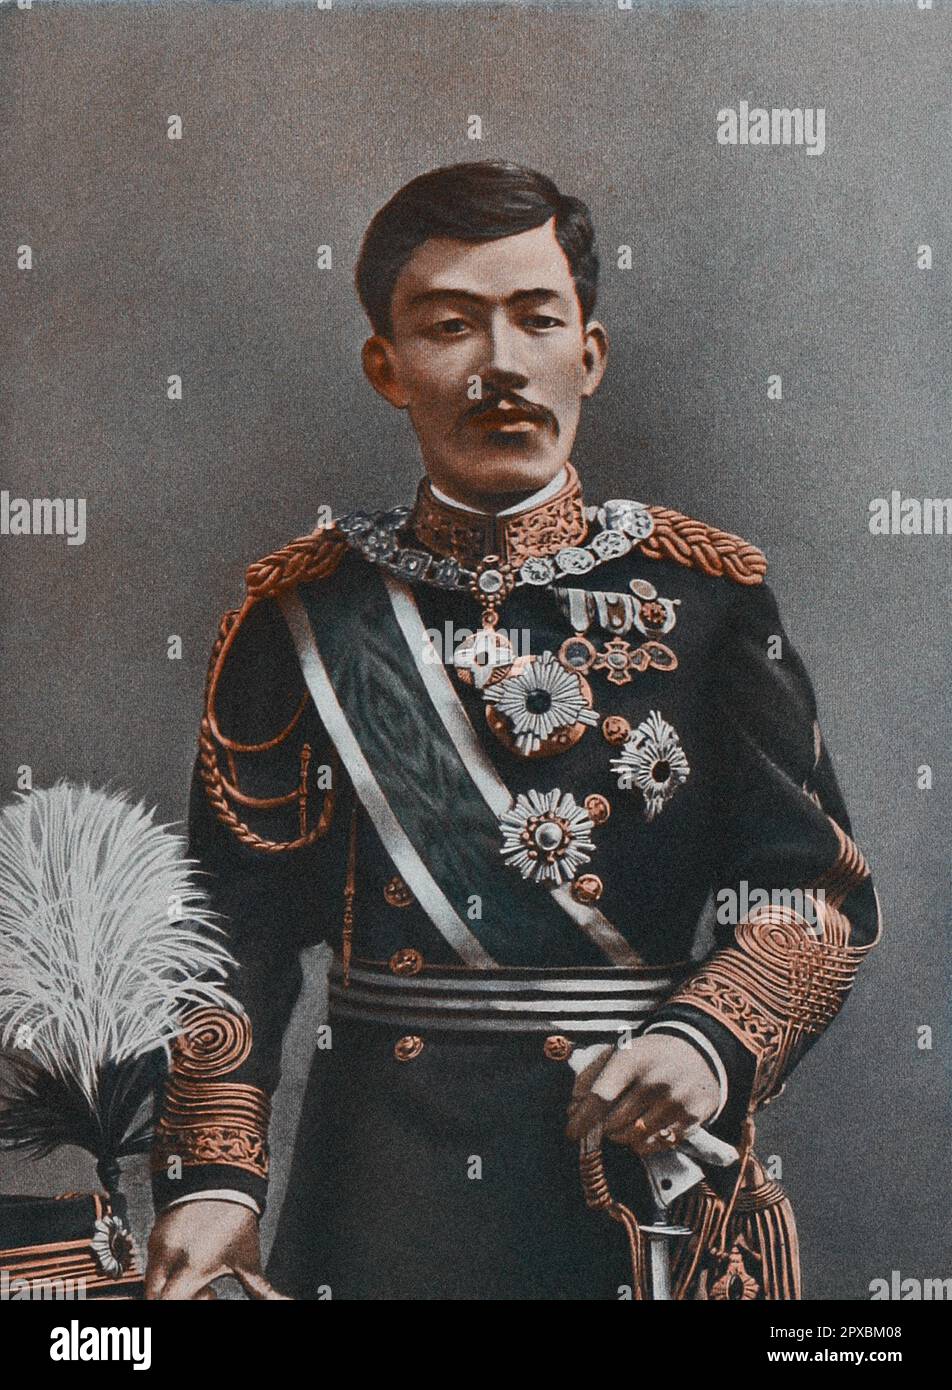 Japanese Emperor Yoshihito (Emperor Taishō).  Emperor Taishō (Taishō-tennō, 1879 – 1926), also known by his personal name Yoshihito was the 123rd Emperor of Japan, according to the traditional order of succession, and the second ruler of the Empire of Japan from 30 July 1912 until his death in 1926.  According to Japanese custom, while reigning the Emperor is simply called 'the Emperor'. After death, he is known by a posthumous name, which is the name of the era coinciding with his reign. Having ruled during the Taishō era, he is known as the 'Emperor Taishō'. Stock Photo